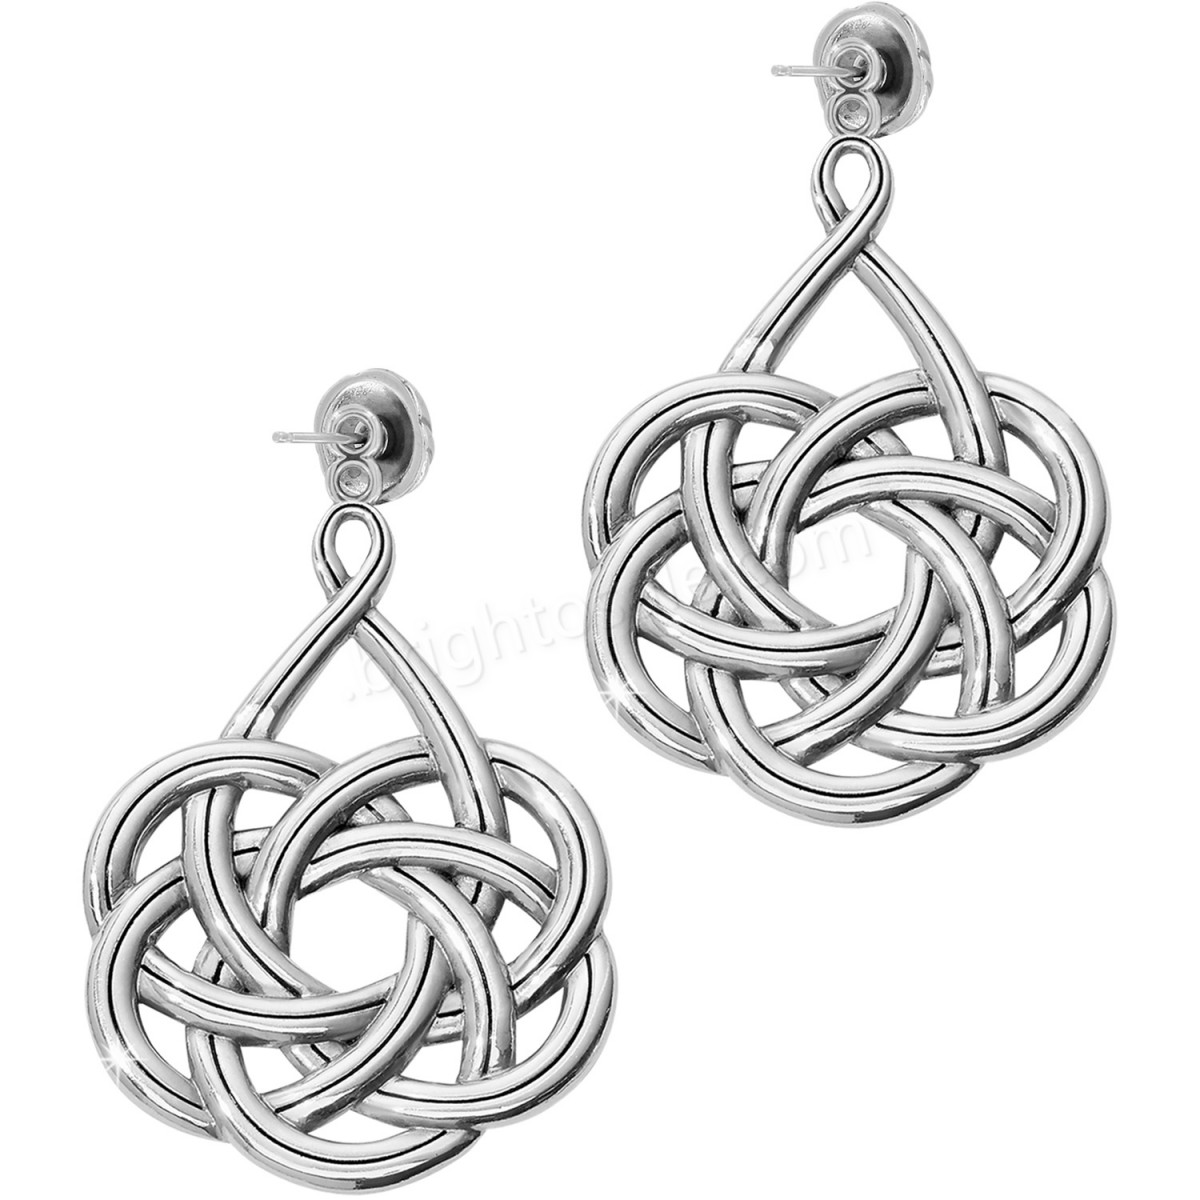 Brighton Collectibles & Online Discount Moderna Post Drop Earrings - -2